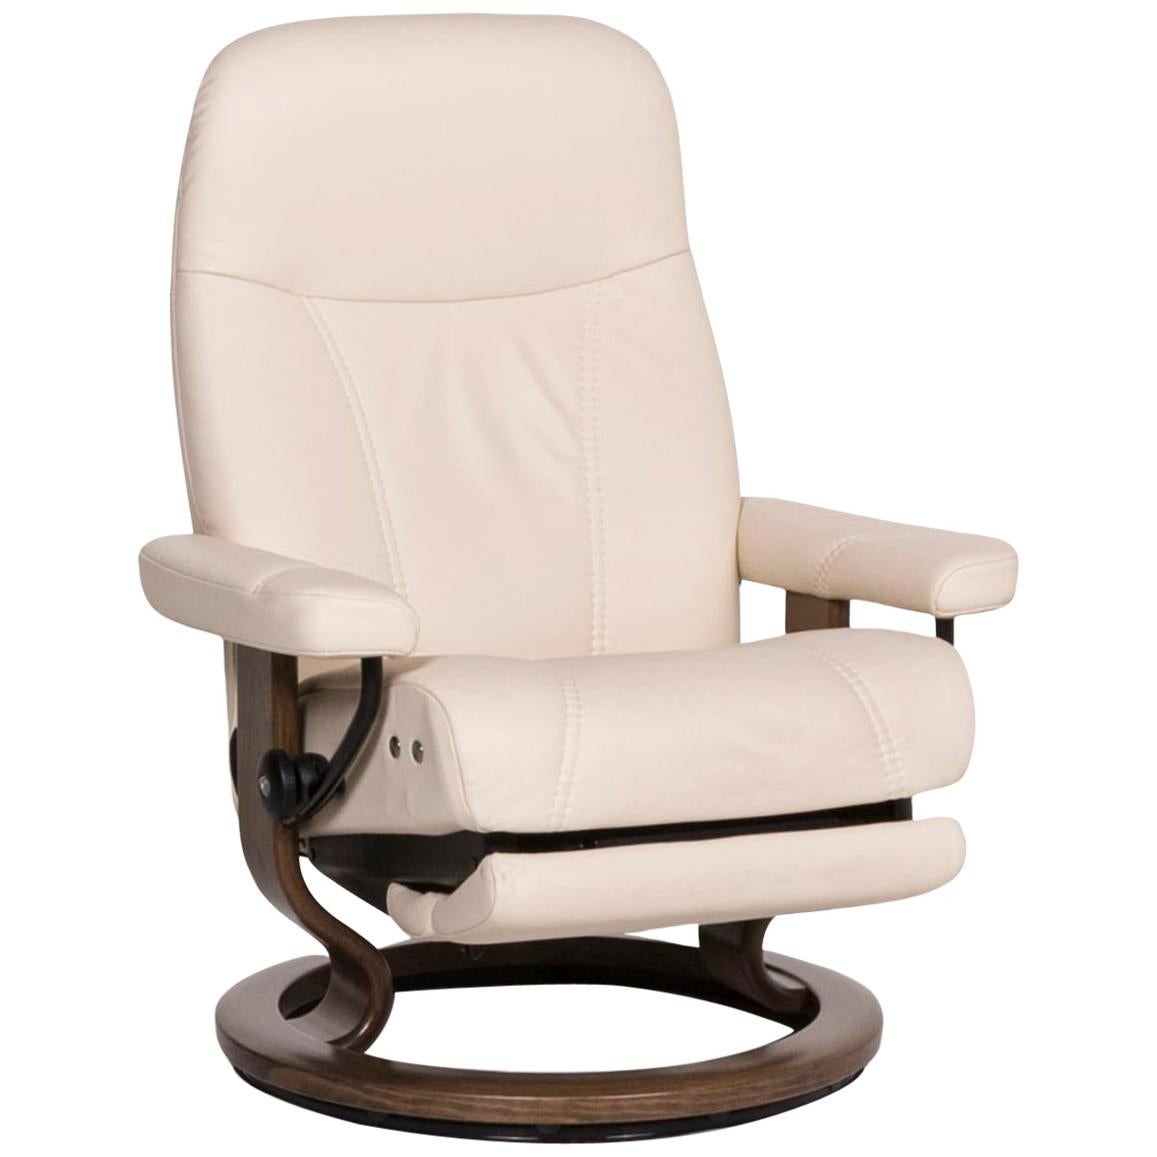 Stressless Consul Leather Armchair Cream Relax Function Electrical Function